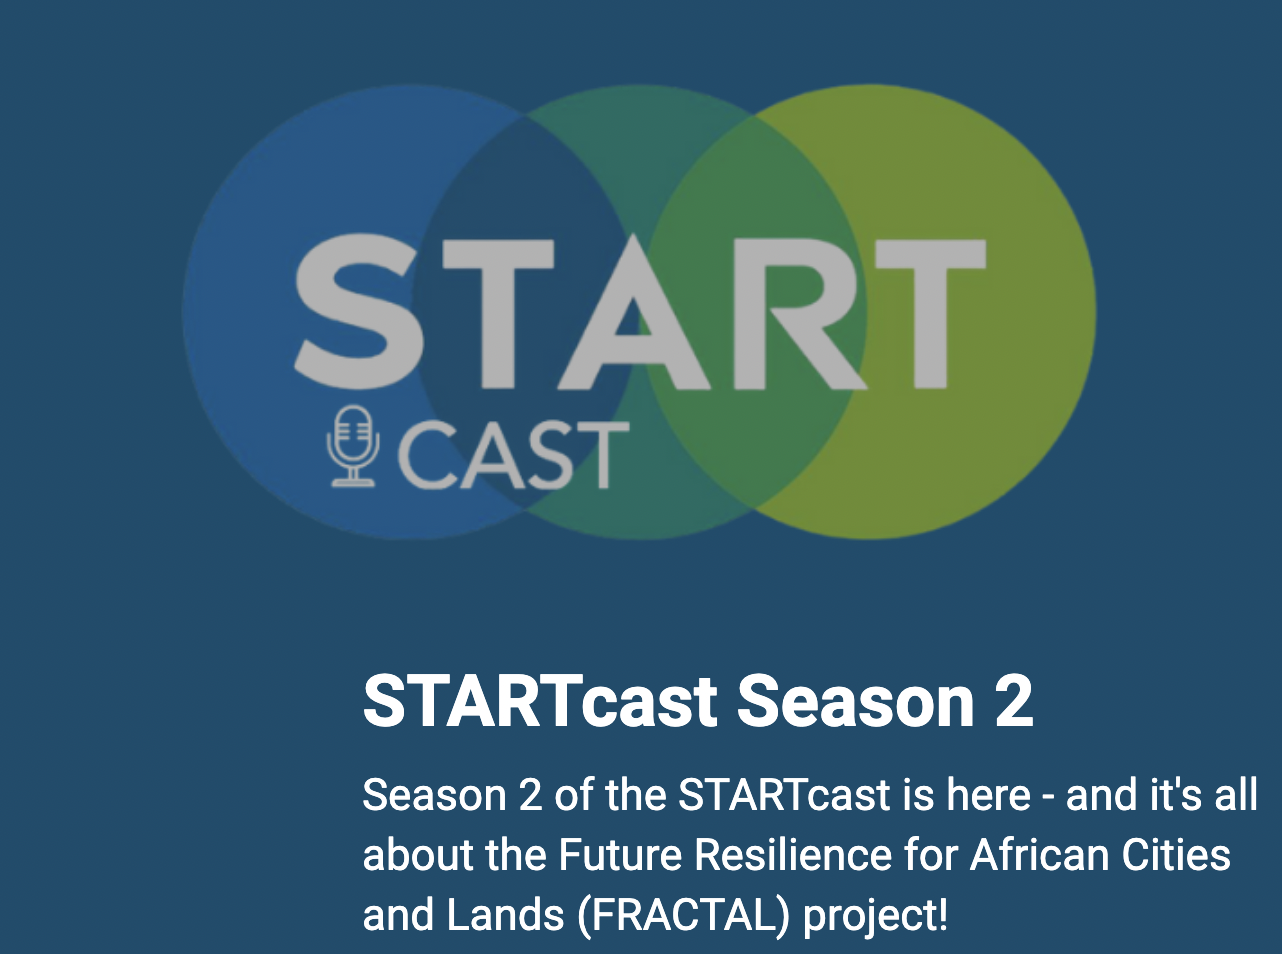 START Cast logo, consisting of three overlapping circles in varying shades of blue and green.